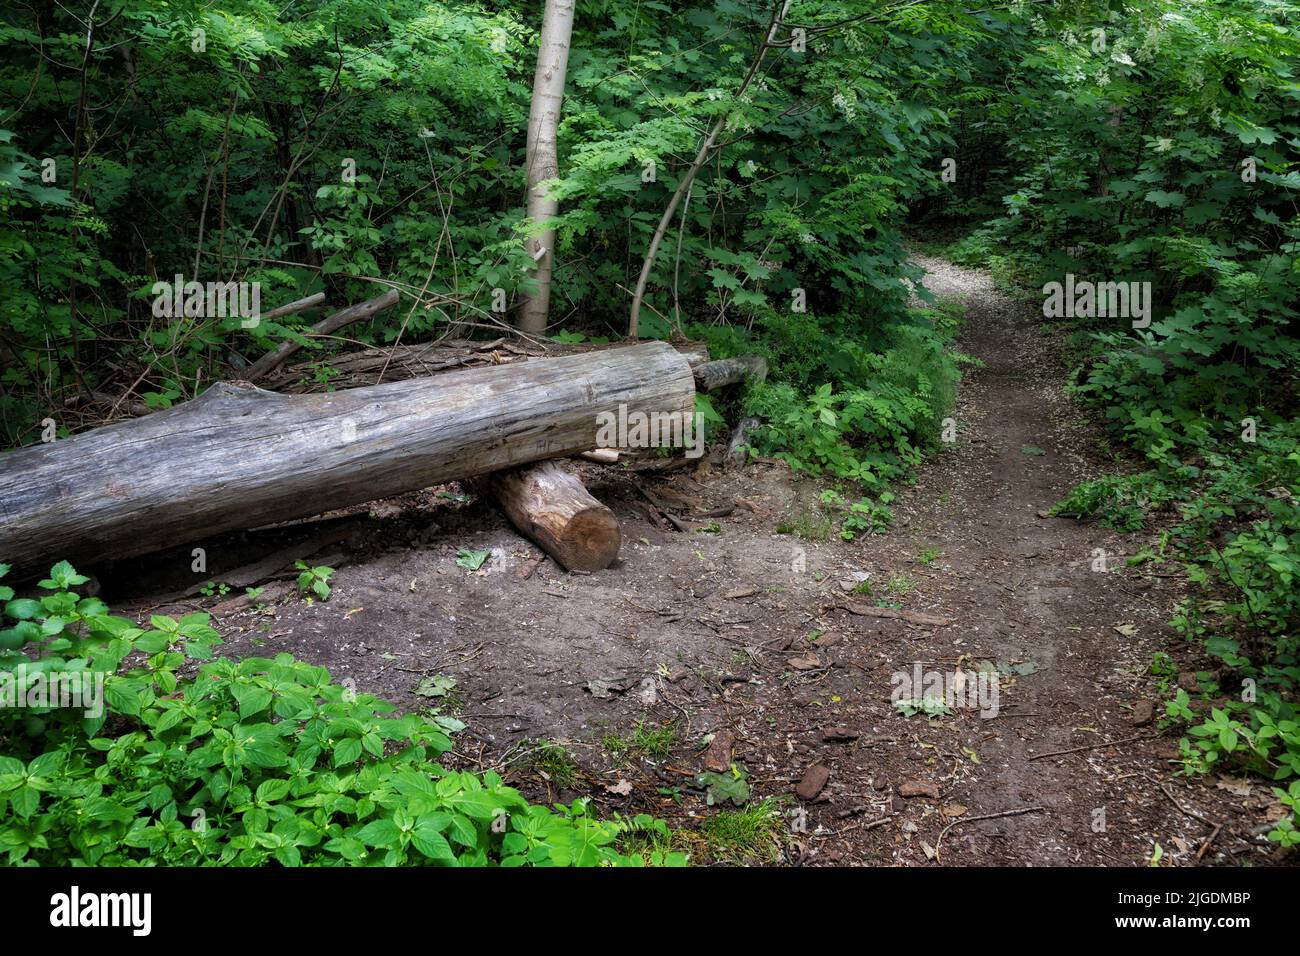 Footpath in the Lasek na Kole forest with bench made of a tree log on the side, Masovia region, Warsaw, Poland. Stock Photo